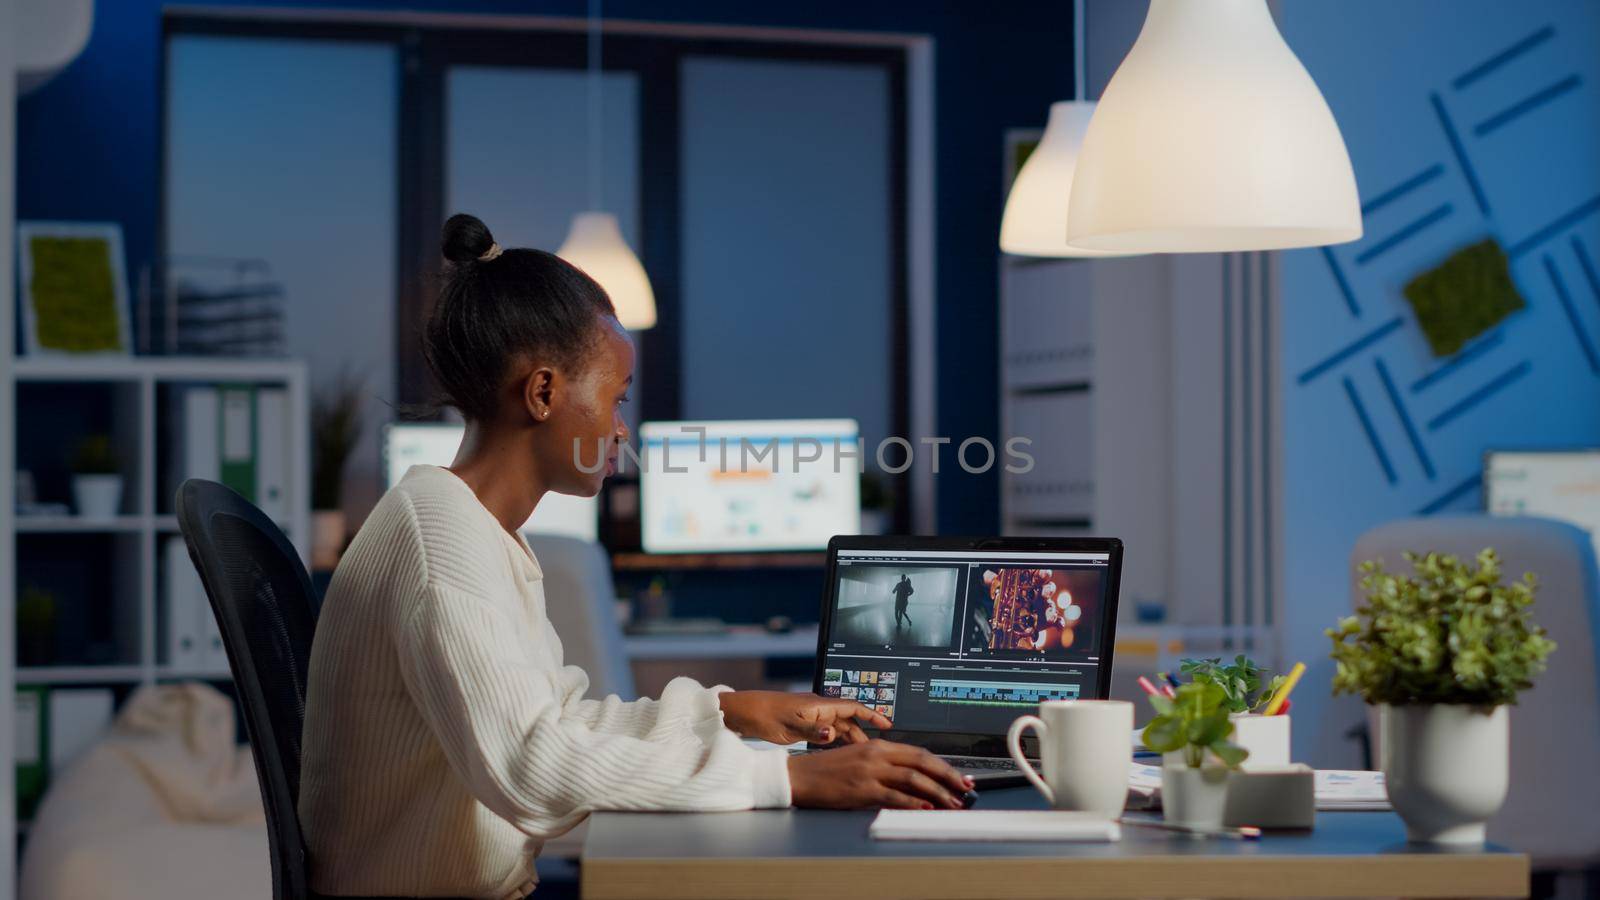 Black video editor working overtime at new project editing audio film montage sitting in start-up business office. Woman content creator using professional laptop, modern technology, network wireless